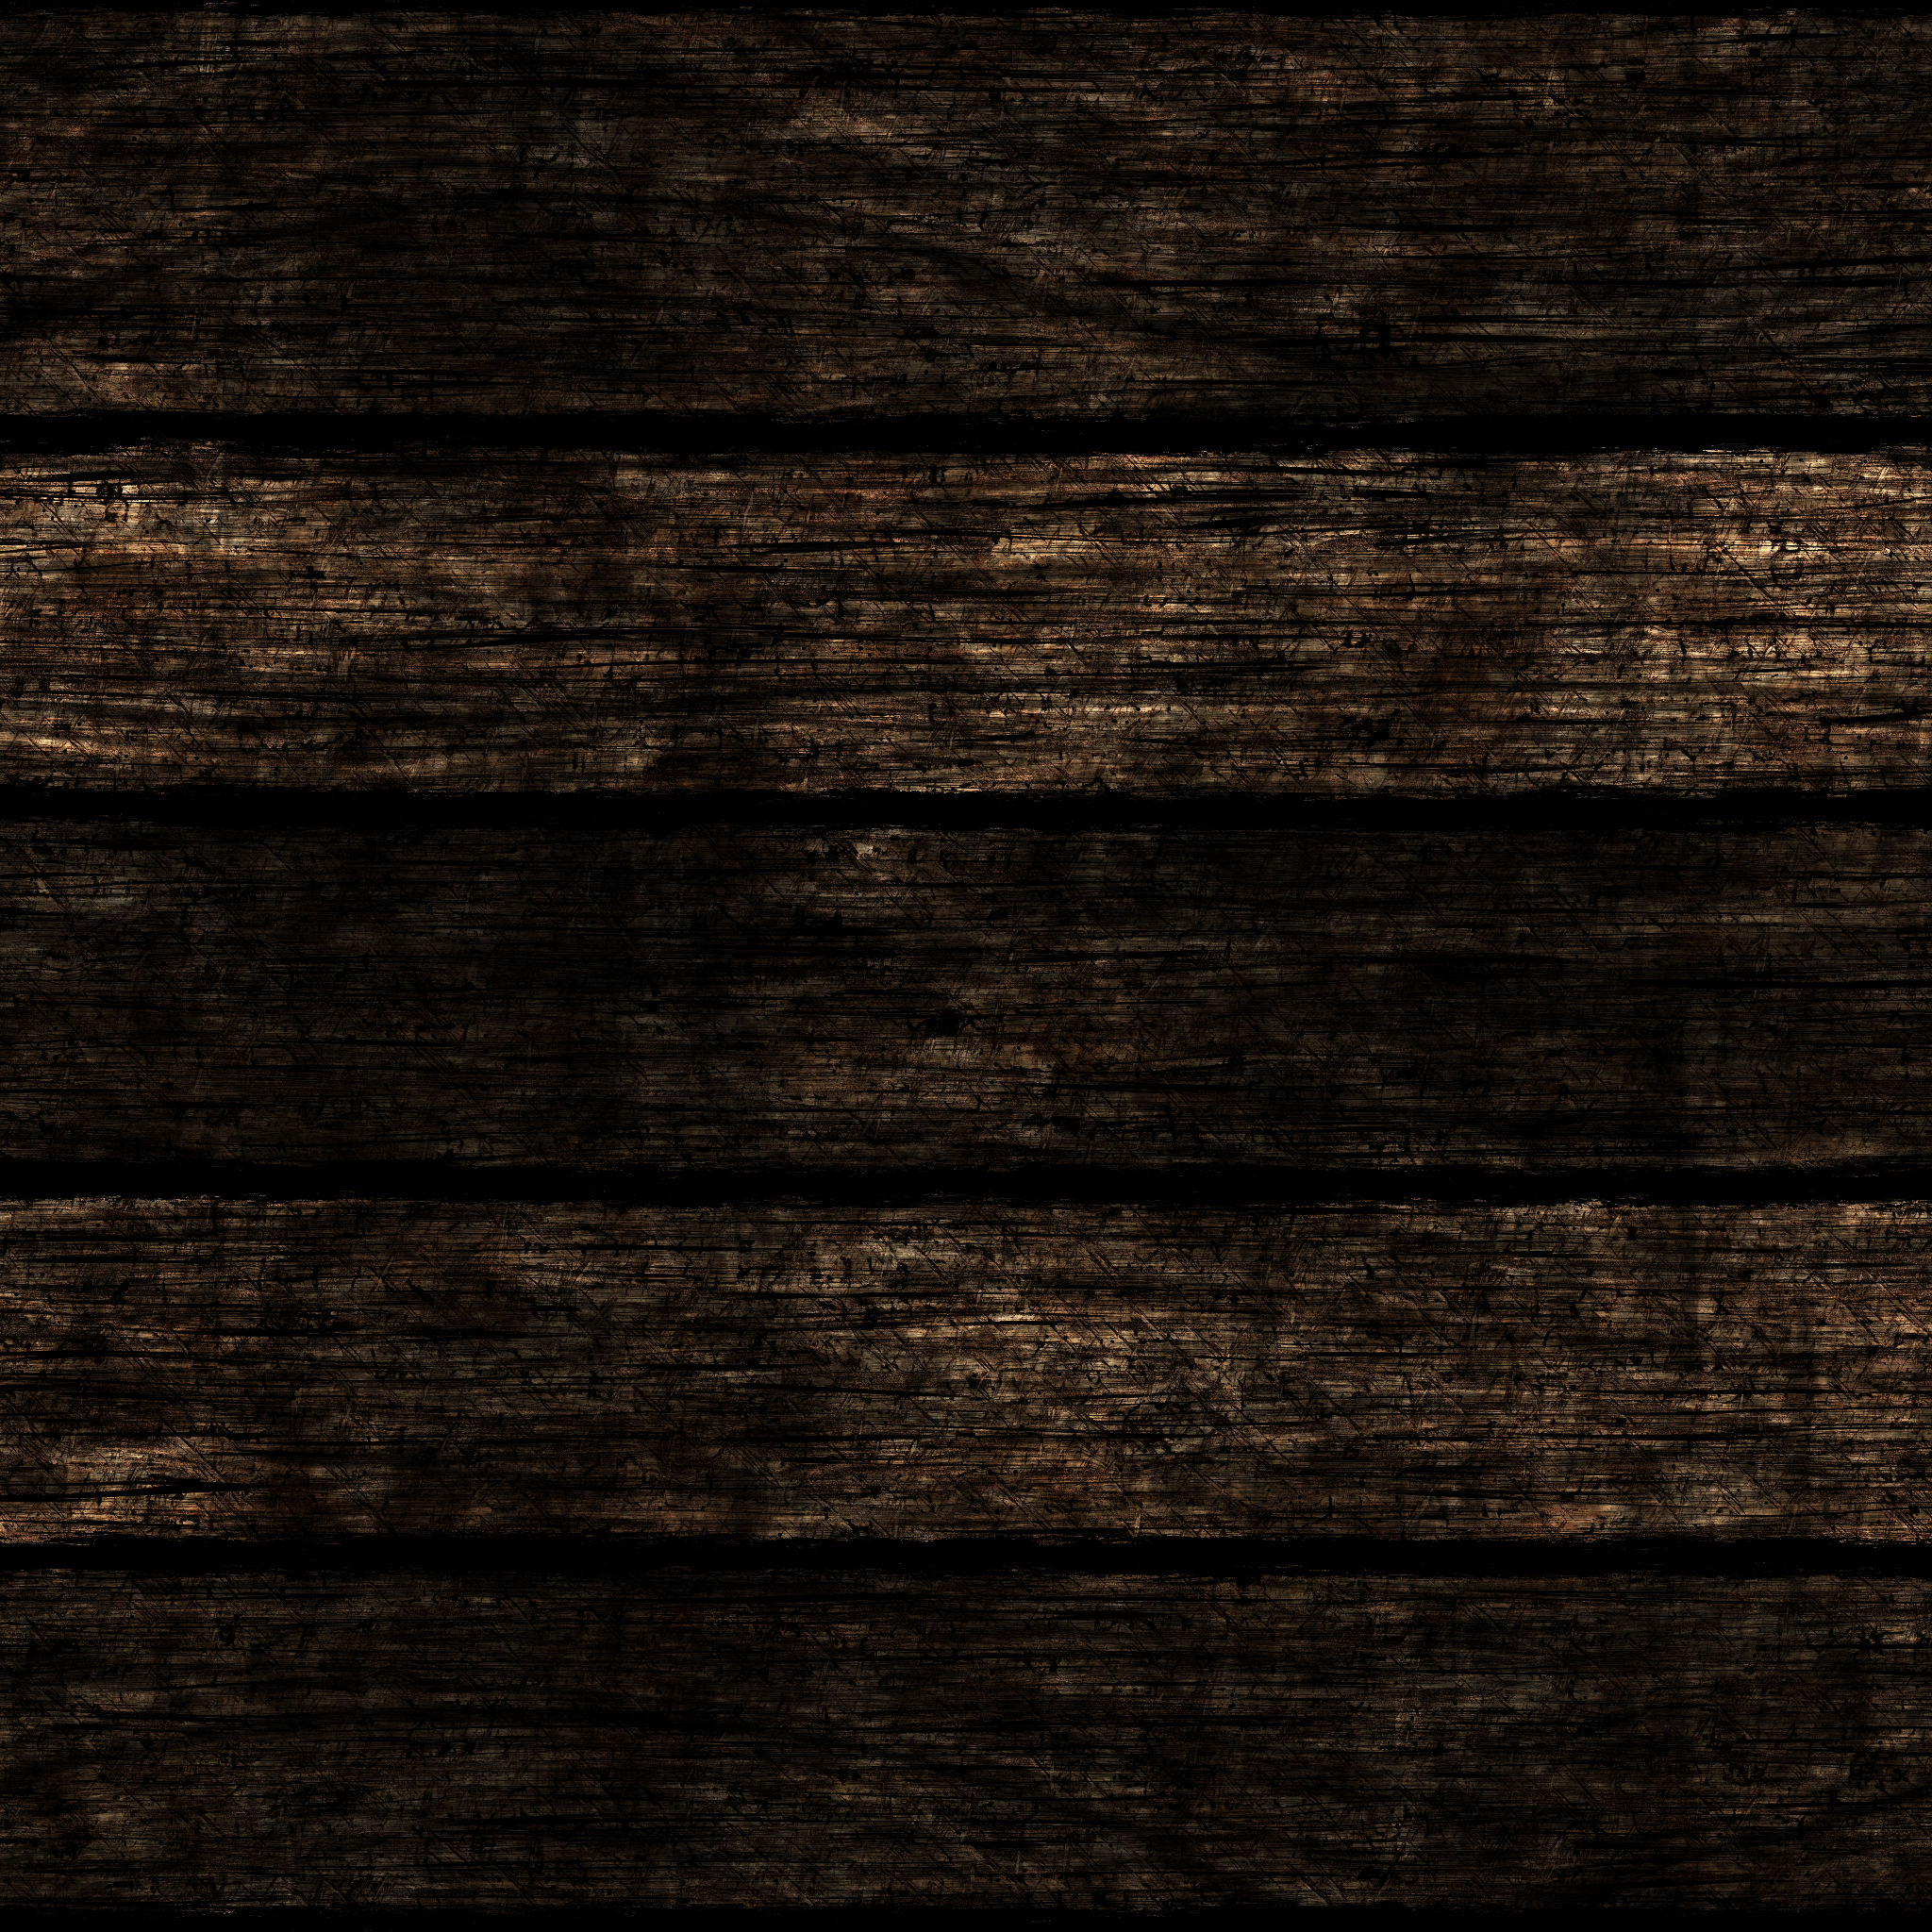 Wooden Wall 11